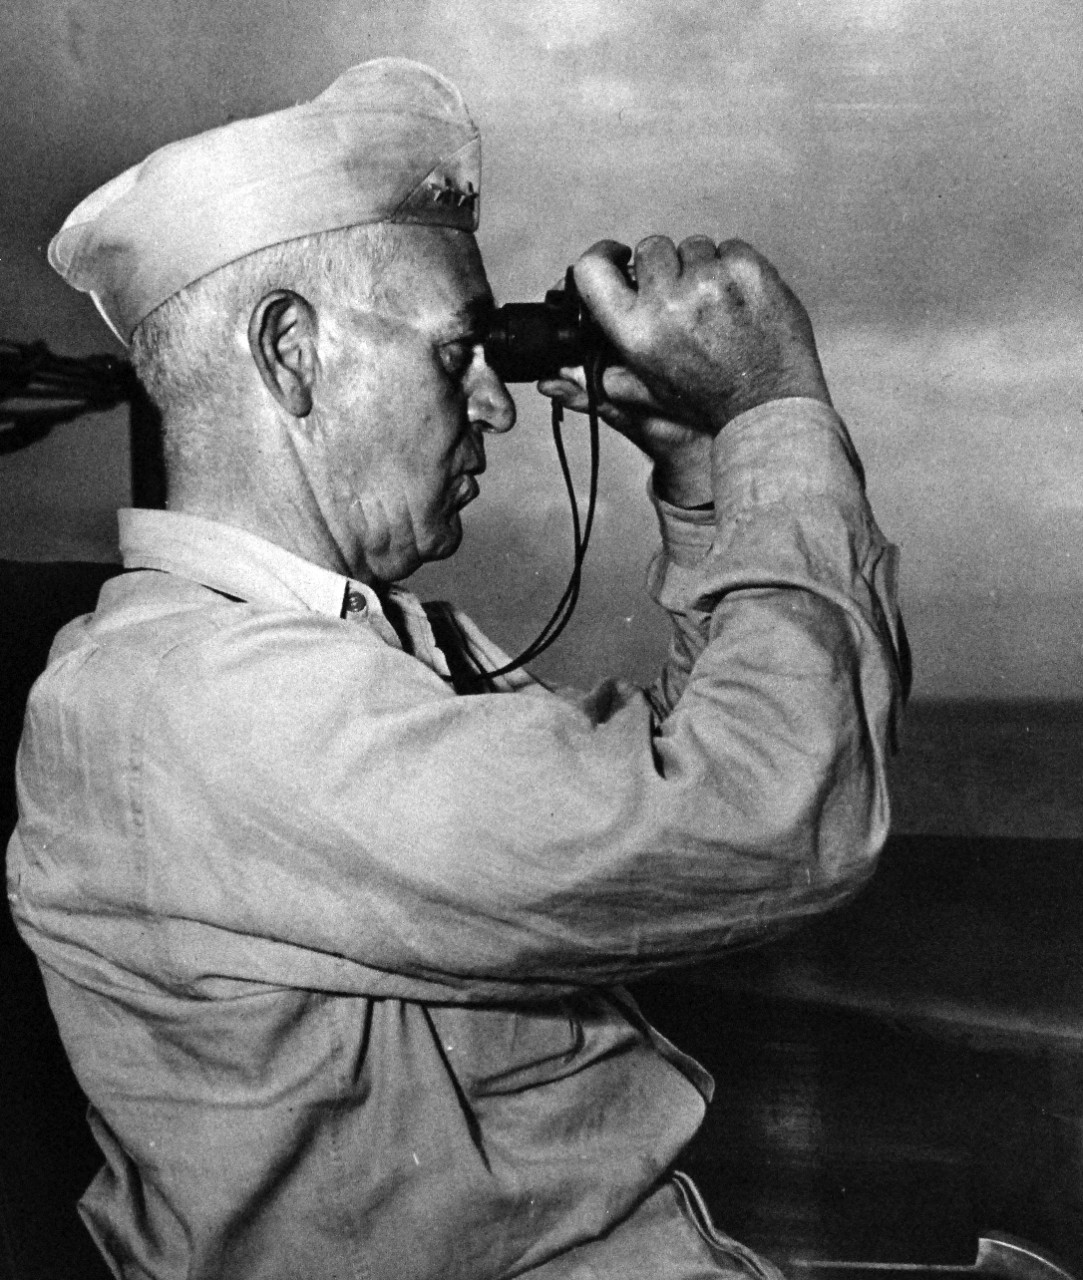 80-G-213847:   Operation Flintlock, January 1944.   Rear Admiral Richard Kelly Turner, USN, as he was leading the victorious US forces in the attack on Kwajalein Atoll in the Marshall Islands, 18 February 1944.  Official U.S. Navy Photograph, now in the collections of the National Archives.  (2014/9/3).  